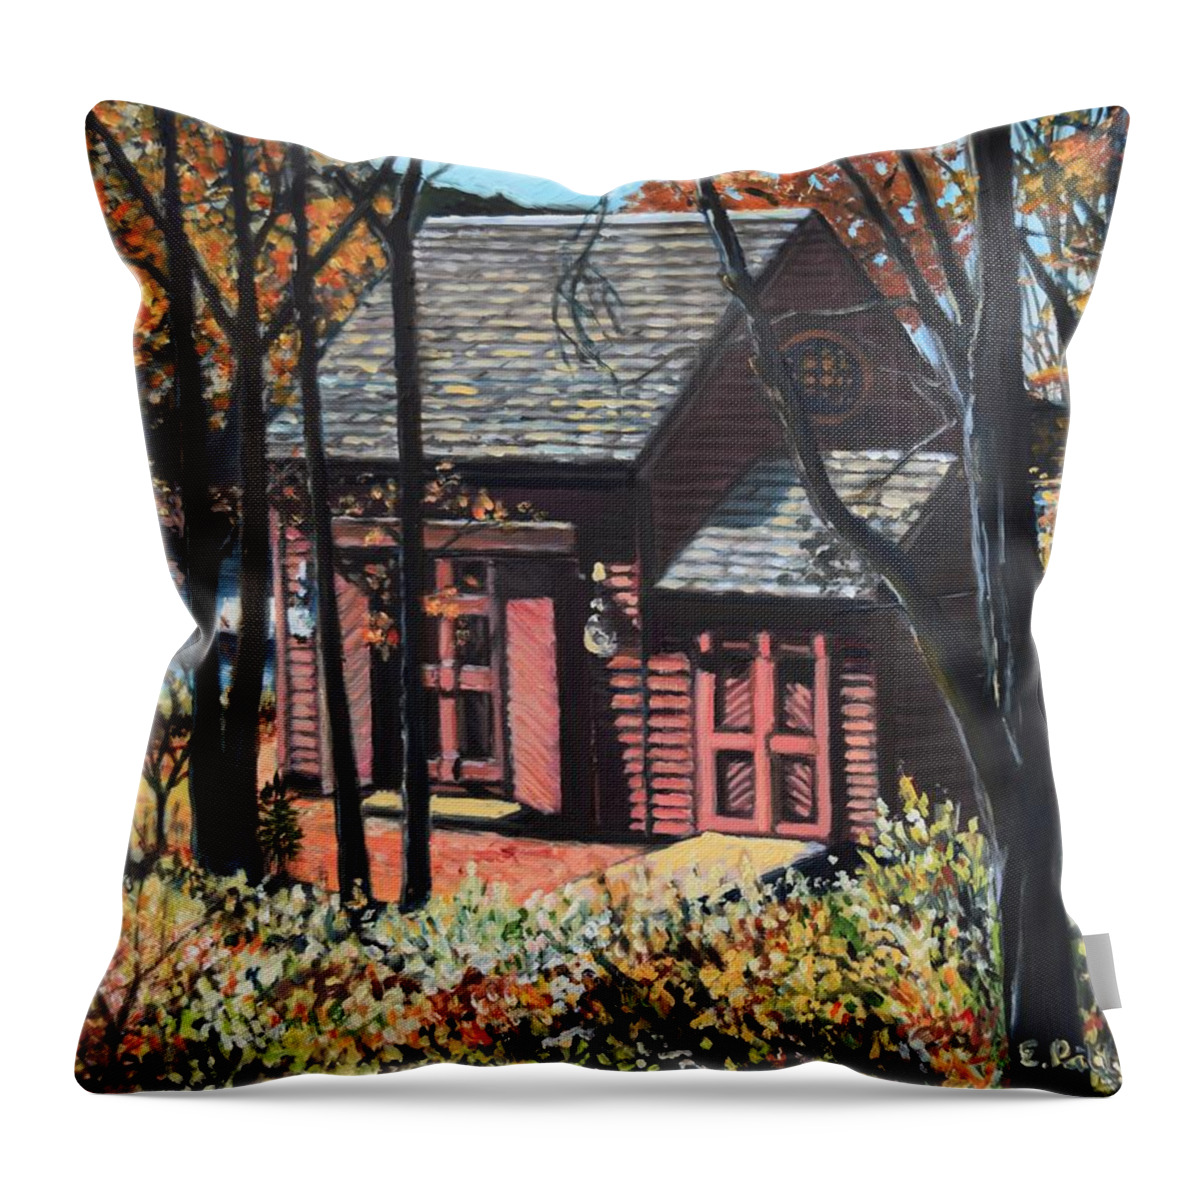 Cottage Throw Pillow featuring the painting Cottage On The Shore At Lobster Cove by Eileen Patten Oliver